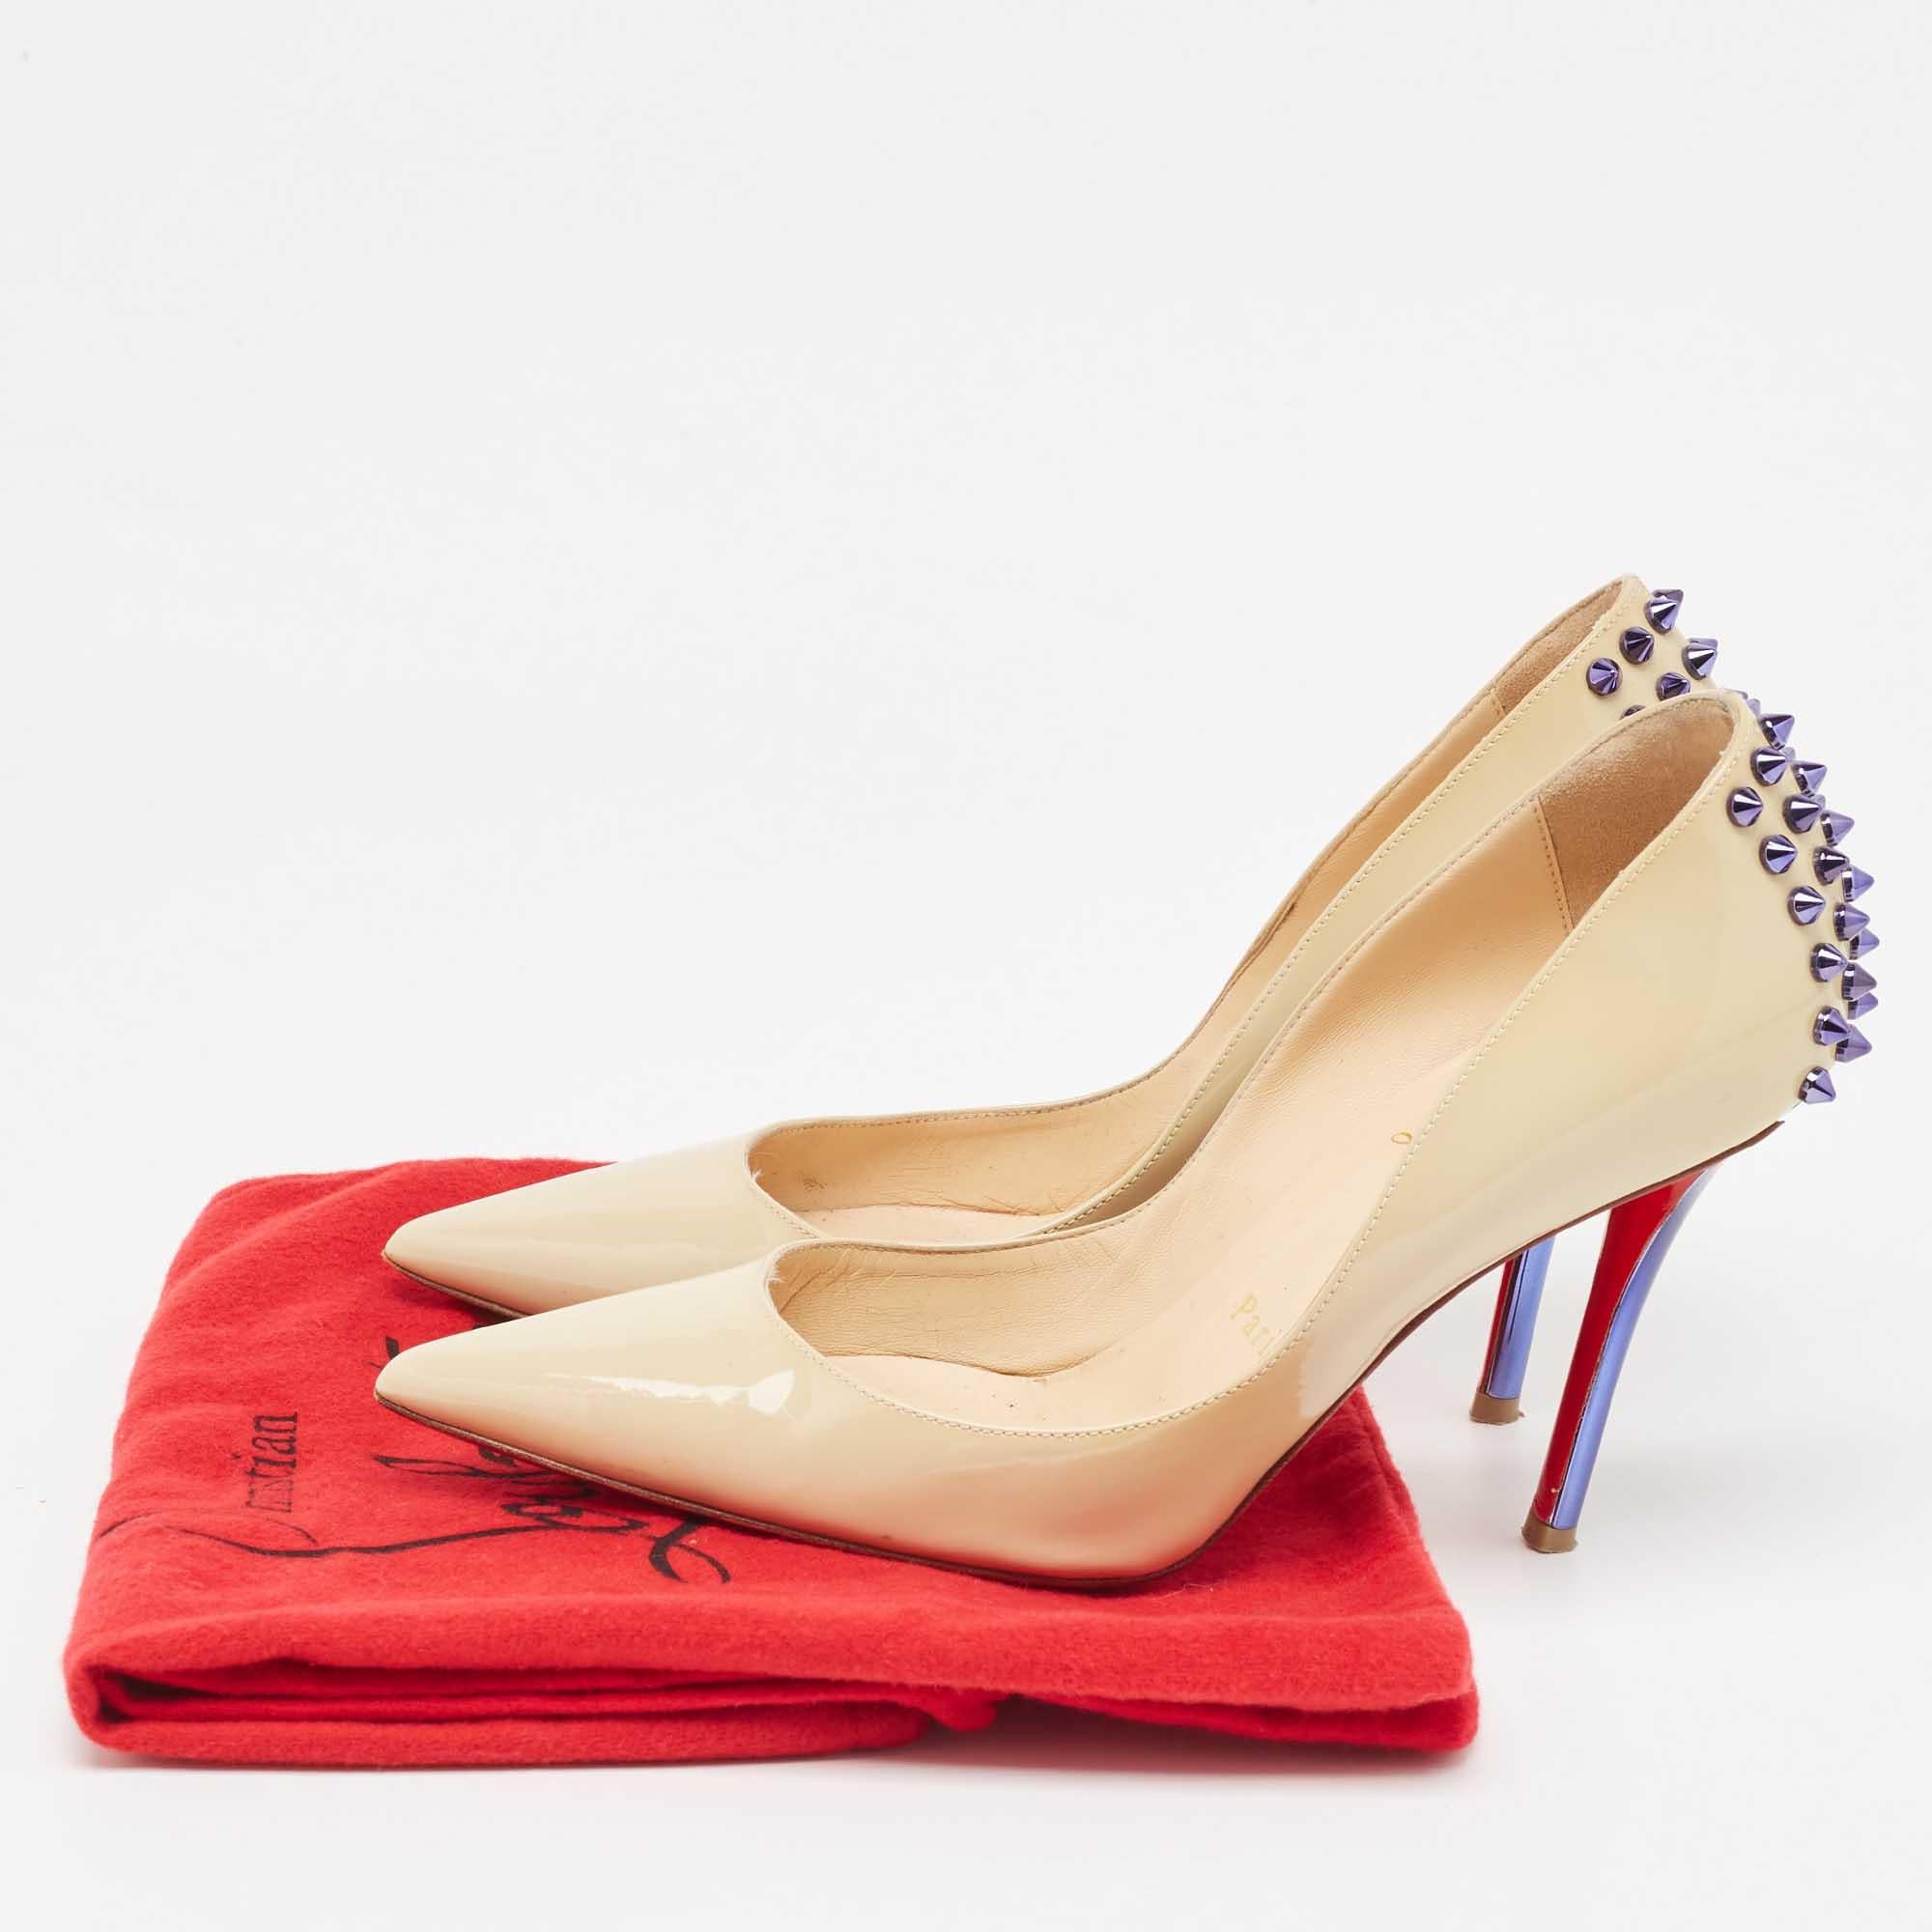 Christian Louboutin Beige Patent Leather Spiked Pumps Size 37 For Sale 5